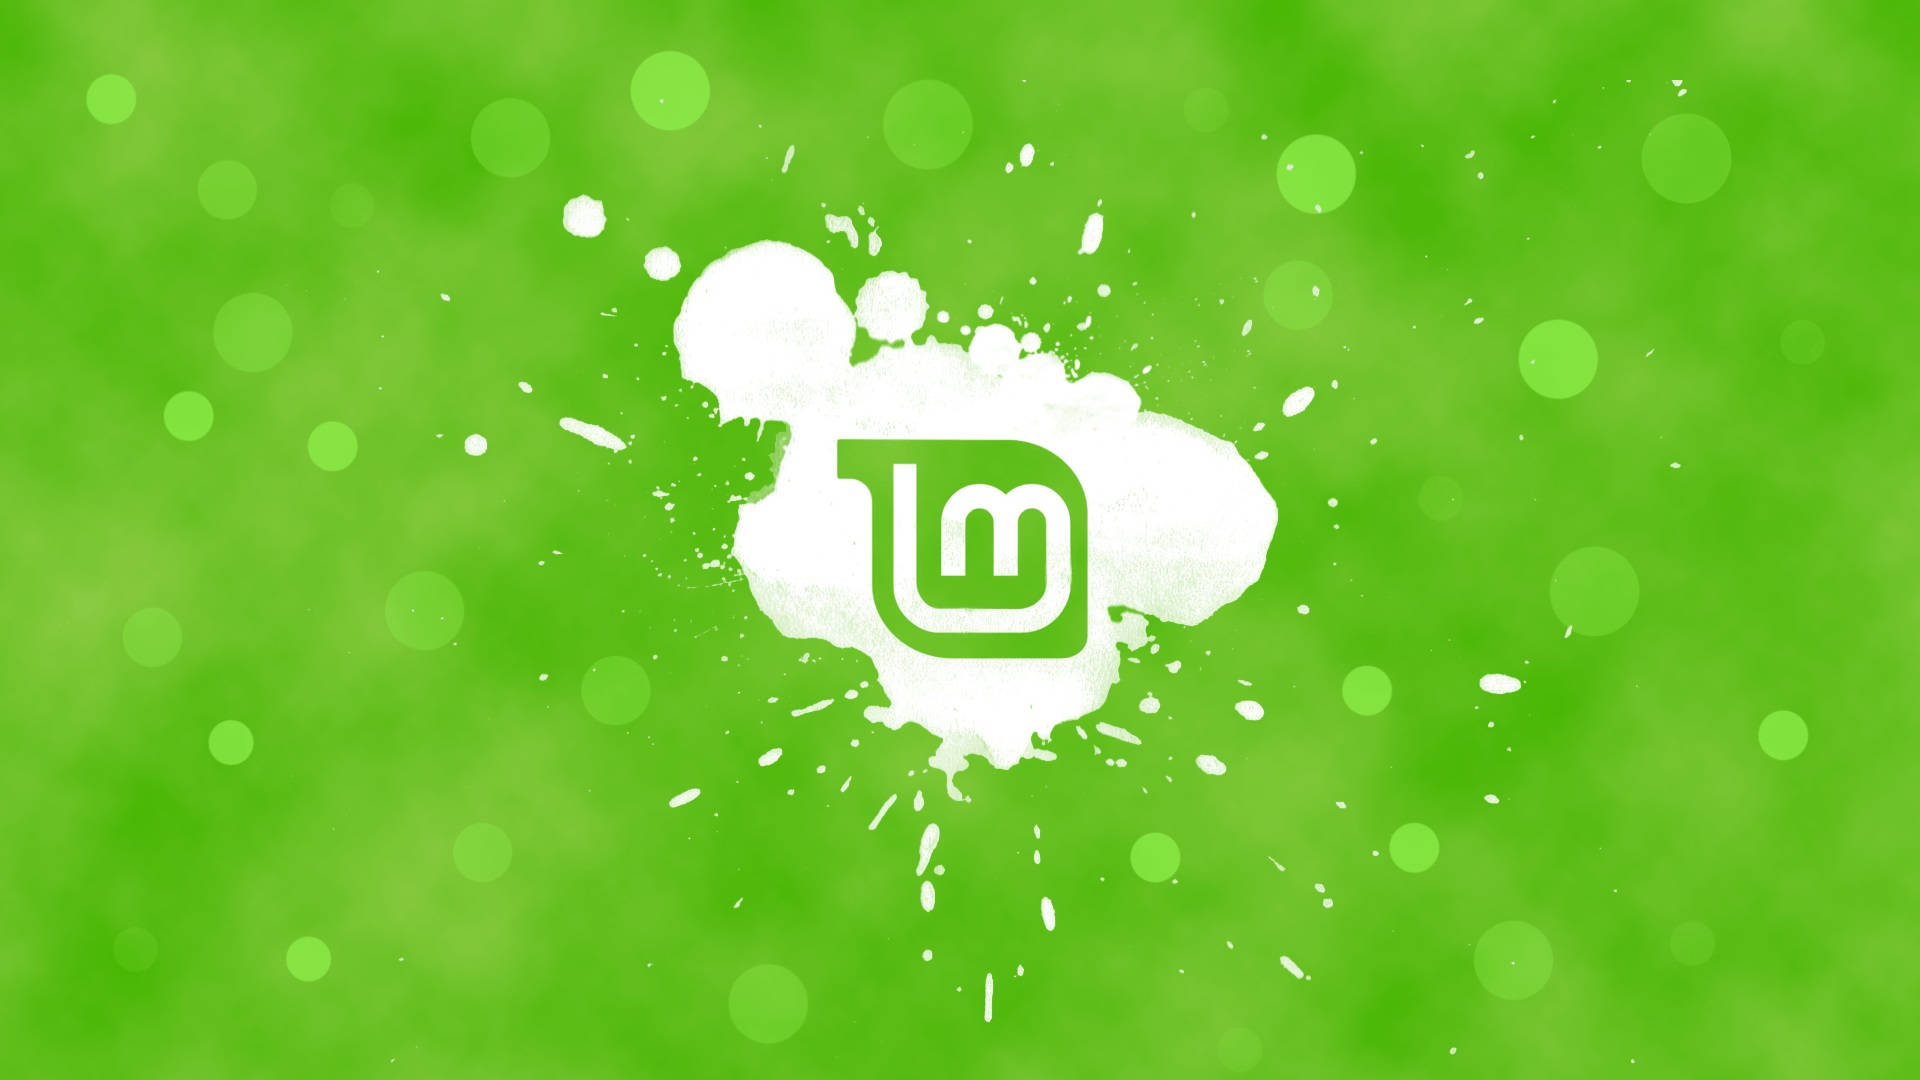 Operating System Linux Mint Green Themed Logo Wallpaper